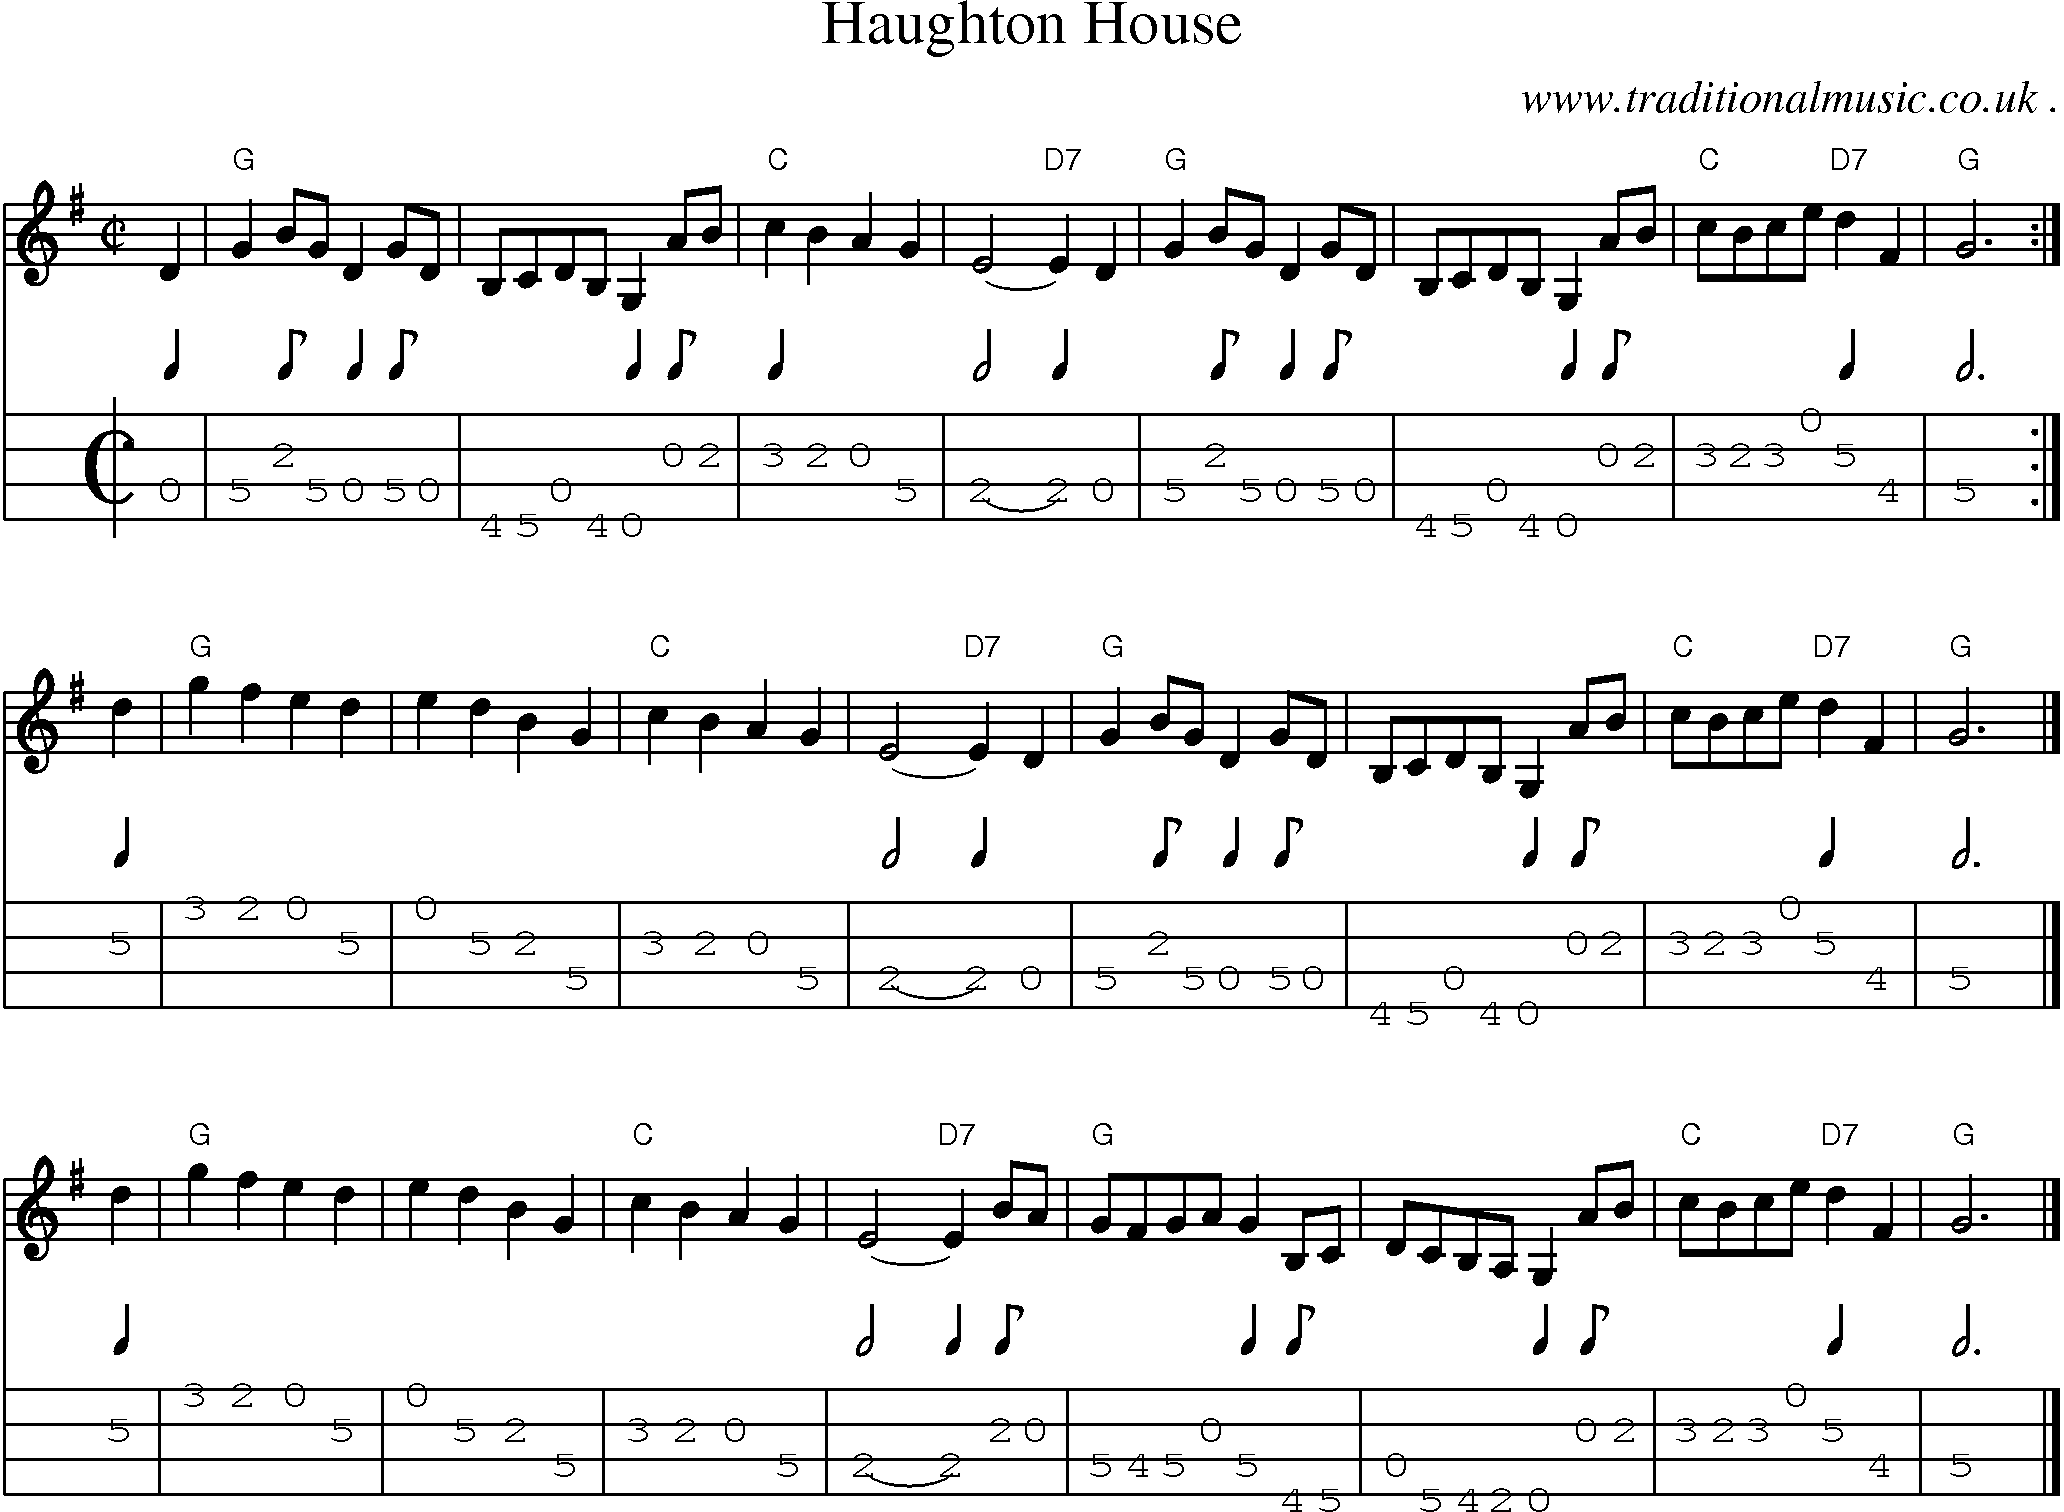 Sheet-music  score, Chords and Mandolin Tabs for Haughton House